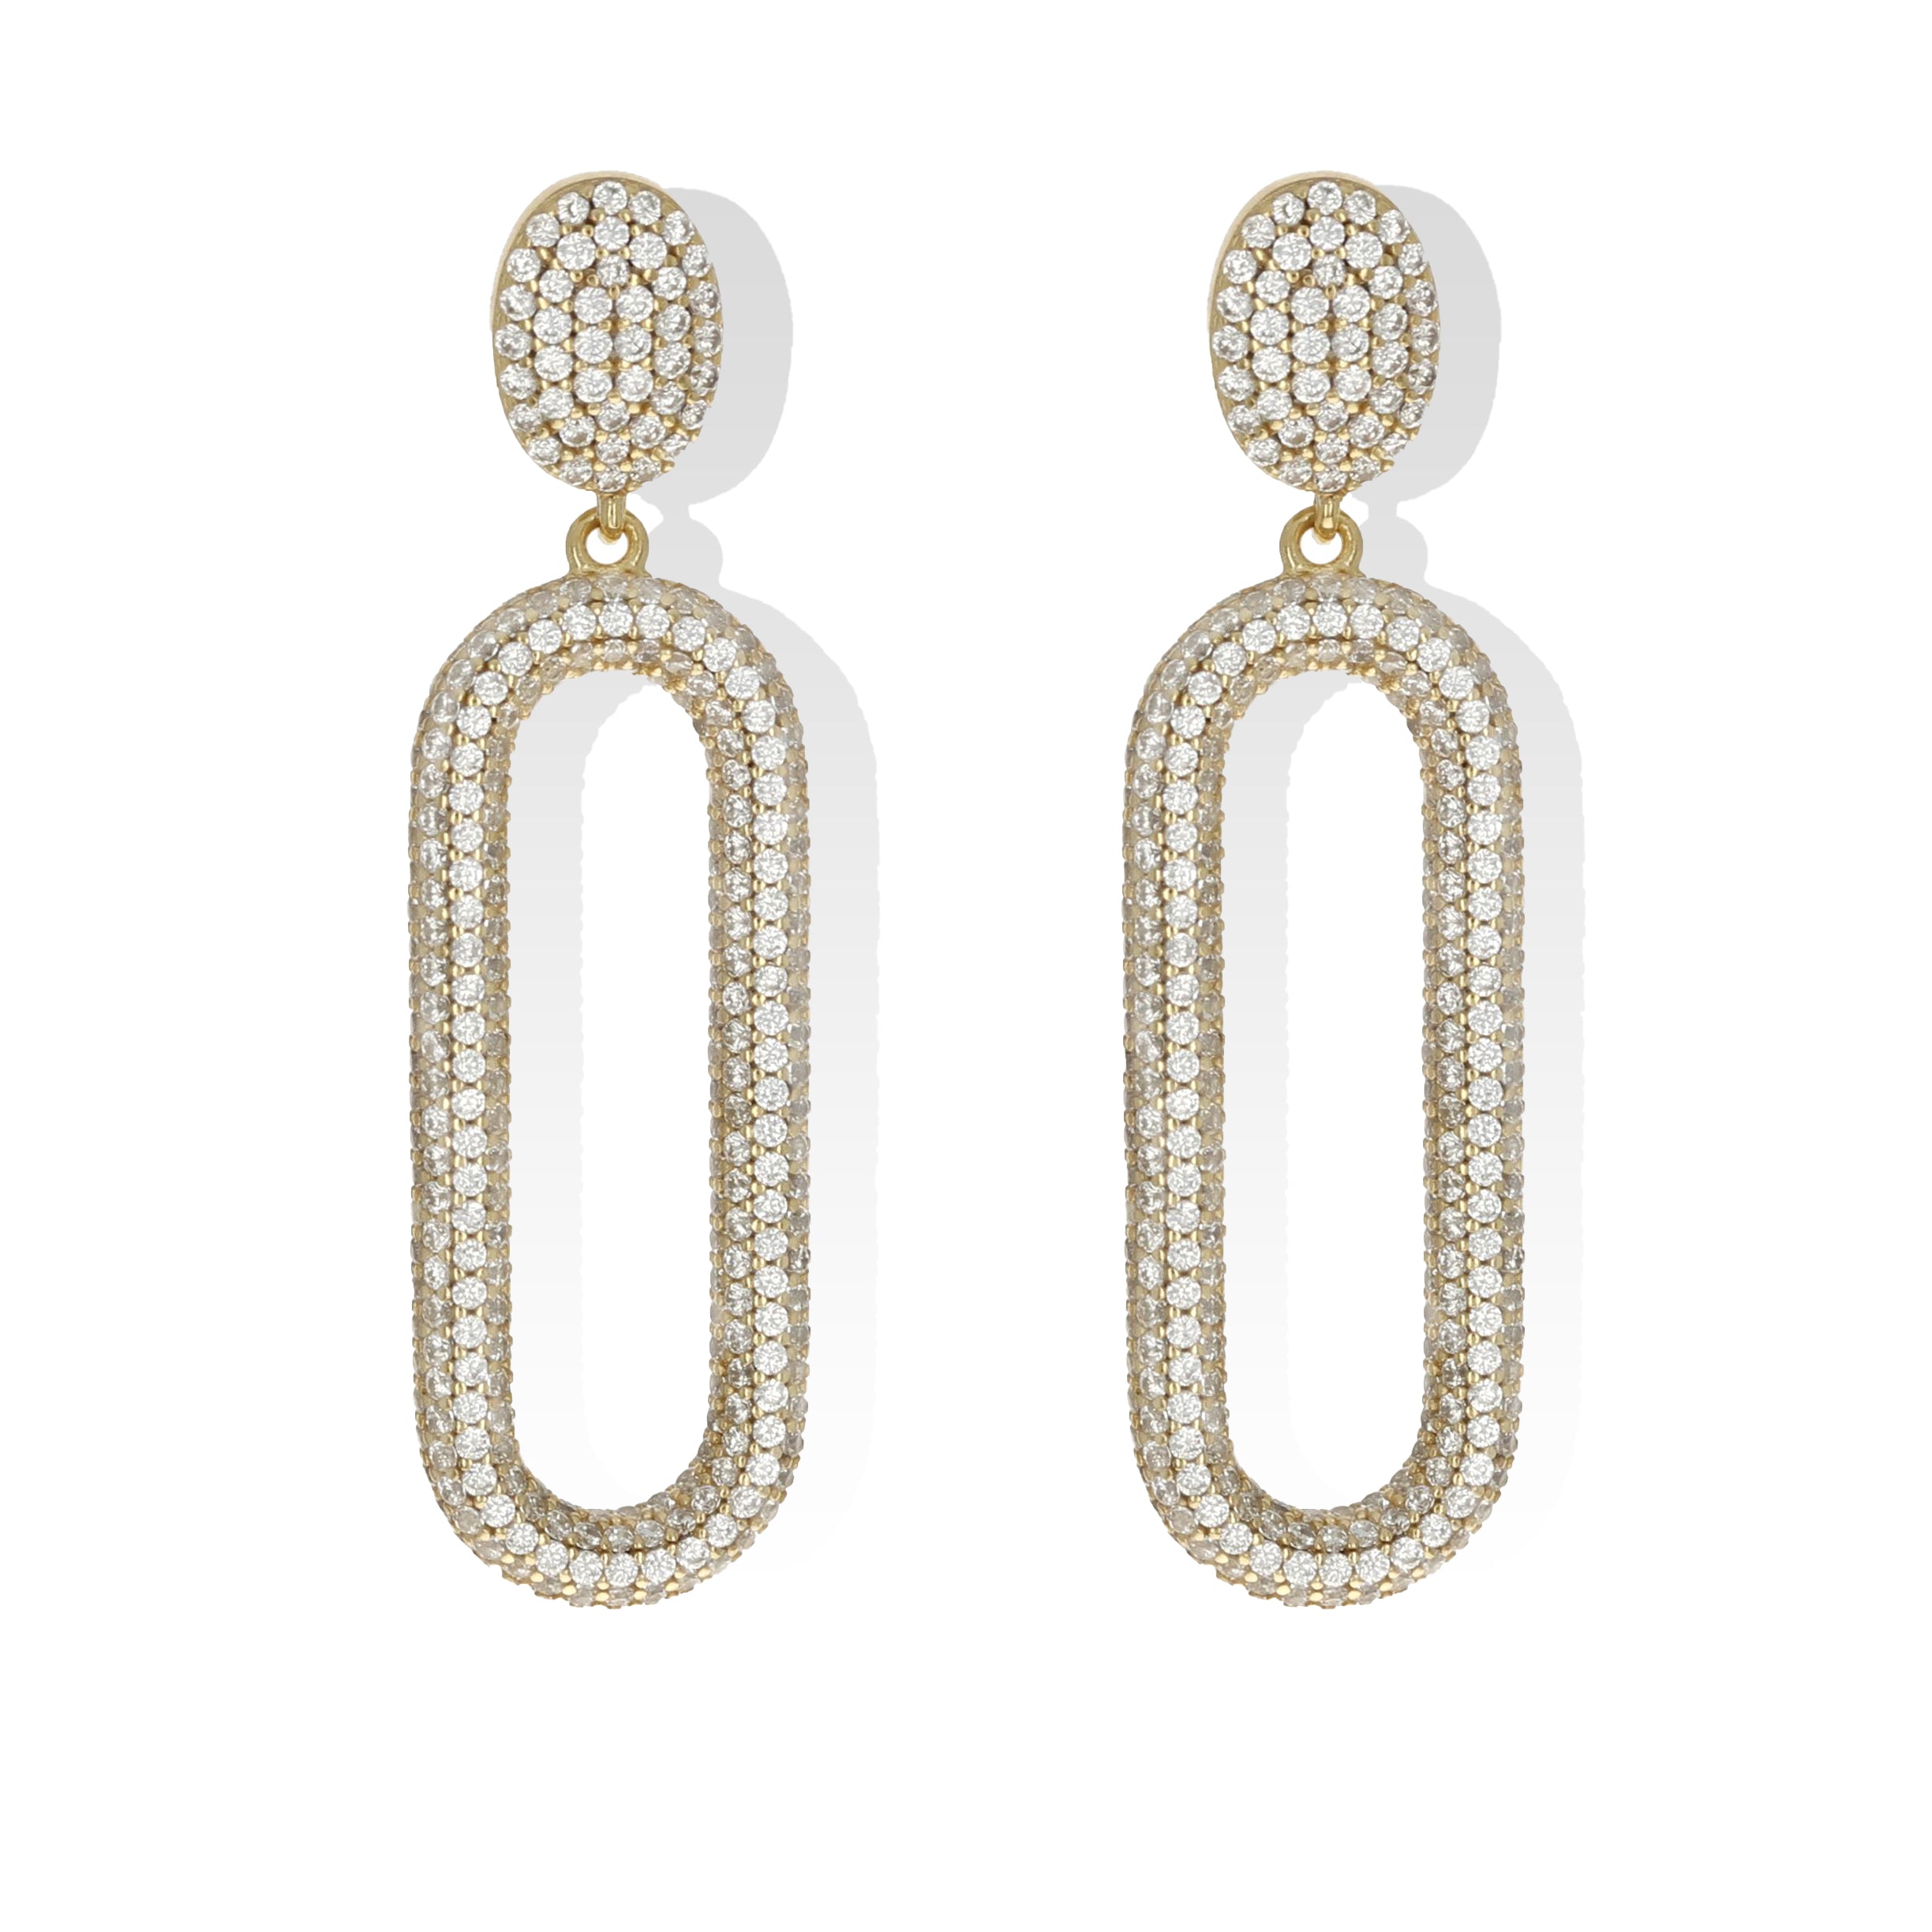 Captivating Oval Drop Earrings